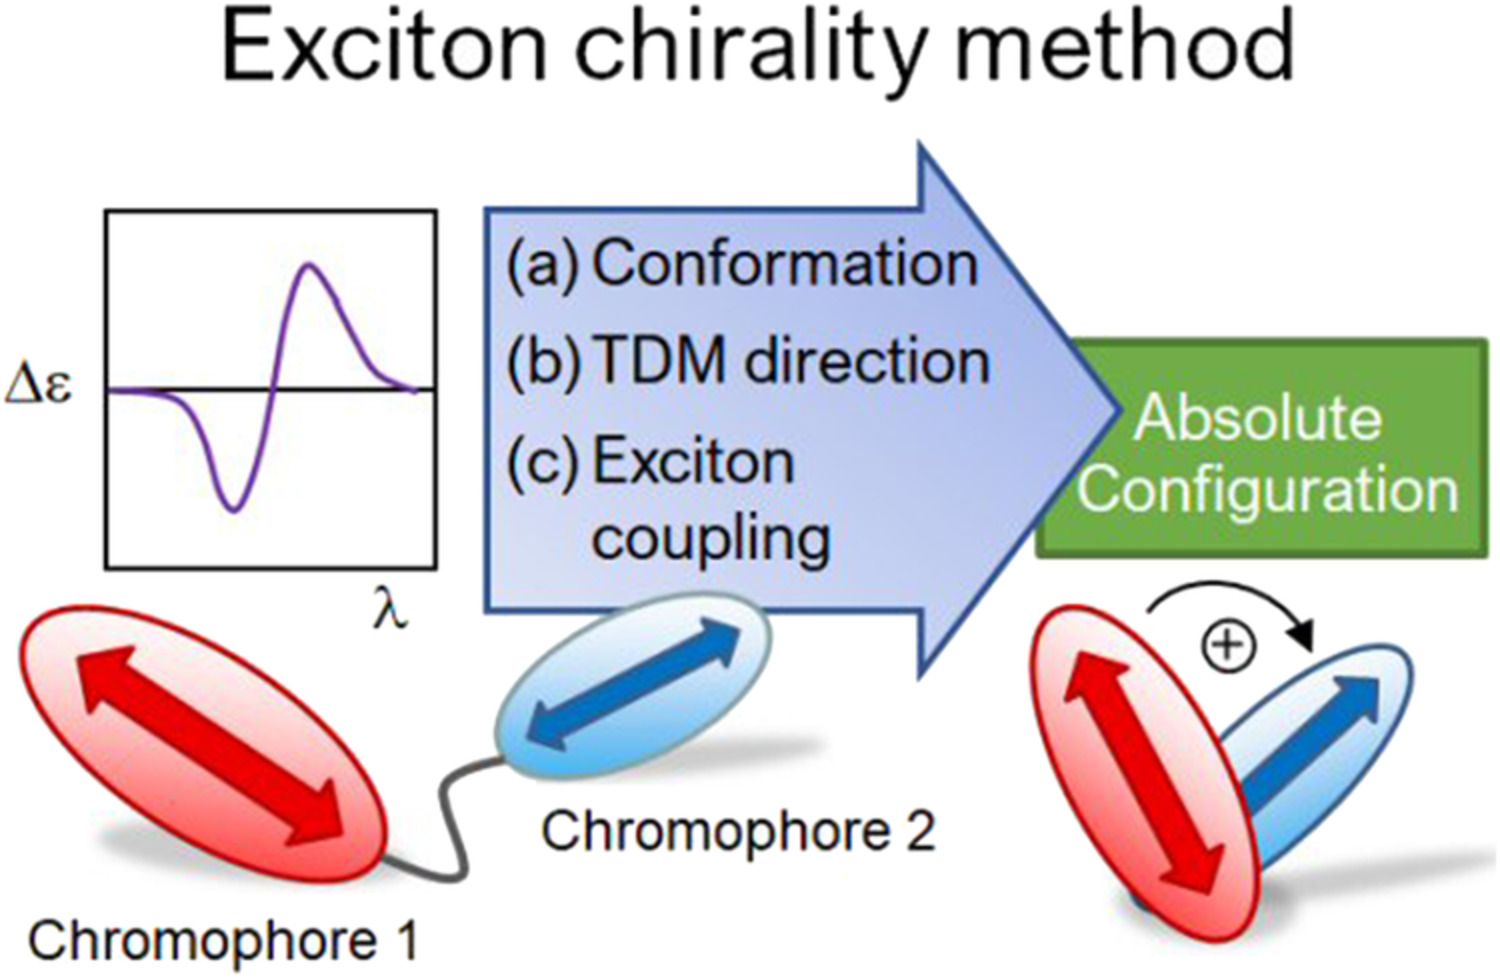 ECD exciton chirality method today: a modern tool for determining absolute configurations